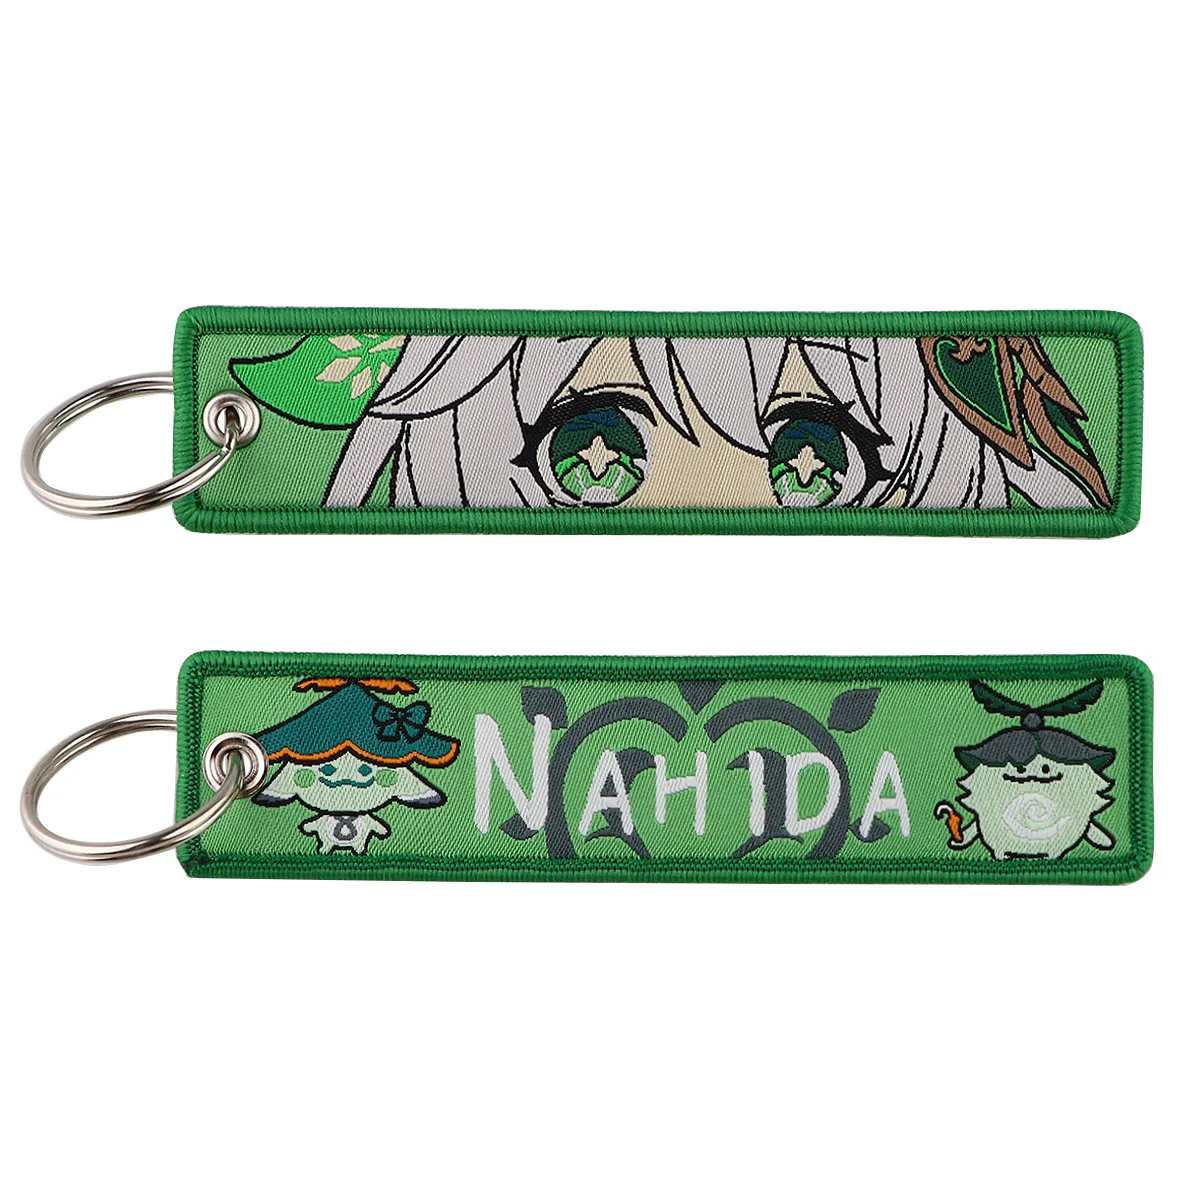 Keychains & Lanyards Various Types Of Cartoon Cool Key Tag Embroidery Fobs For Motorcycles Cars Bag Backpack Keychain Fashion Ring Gi Otnfw